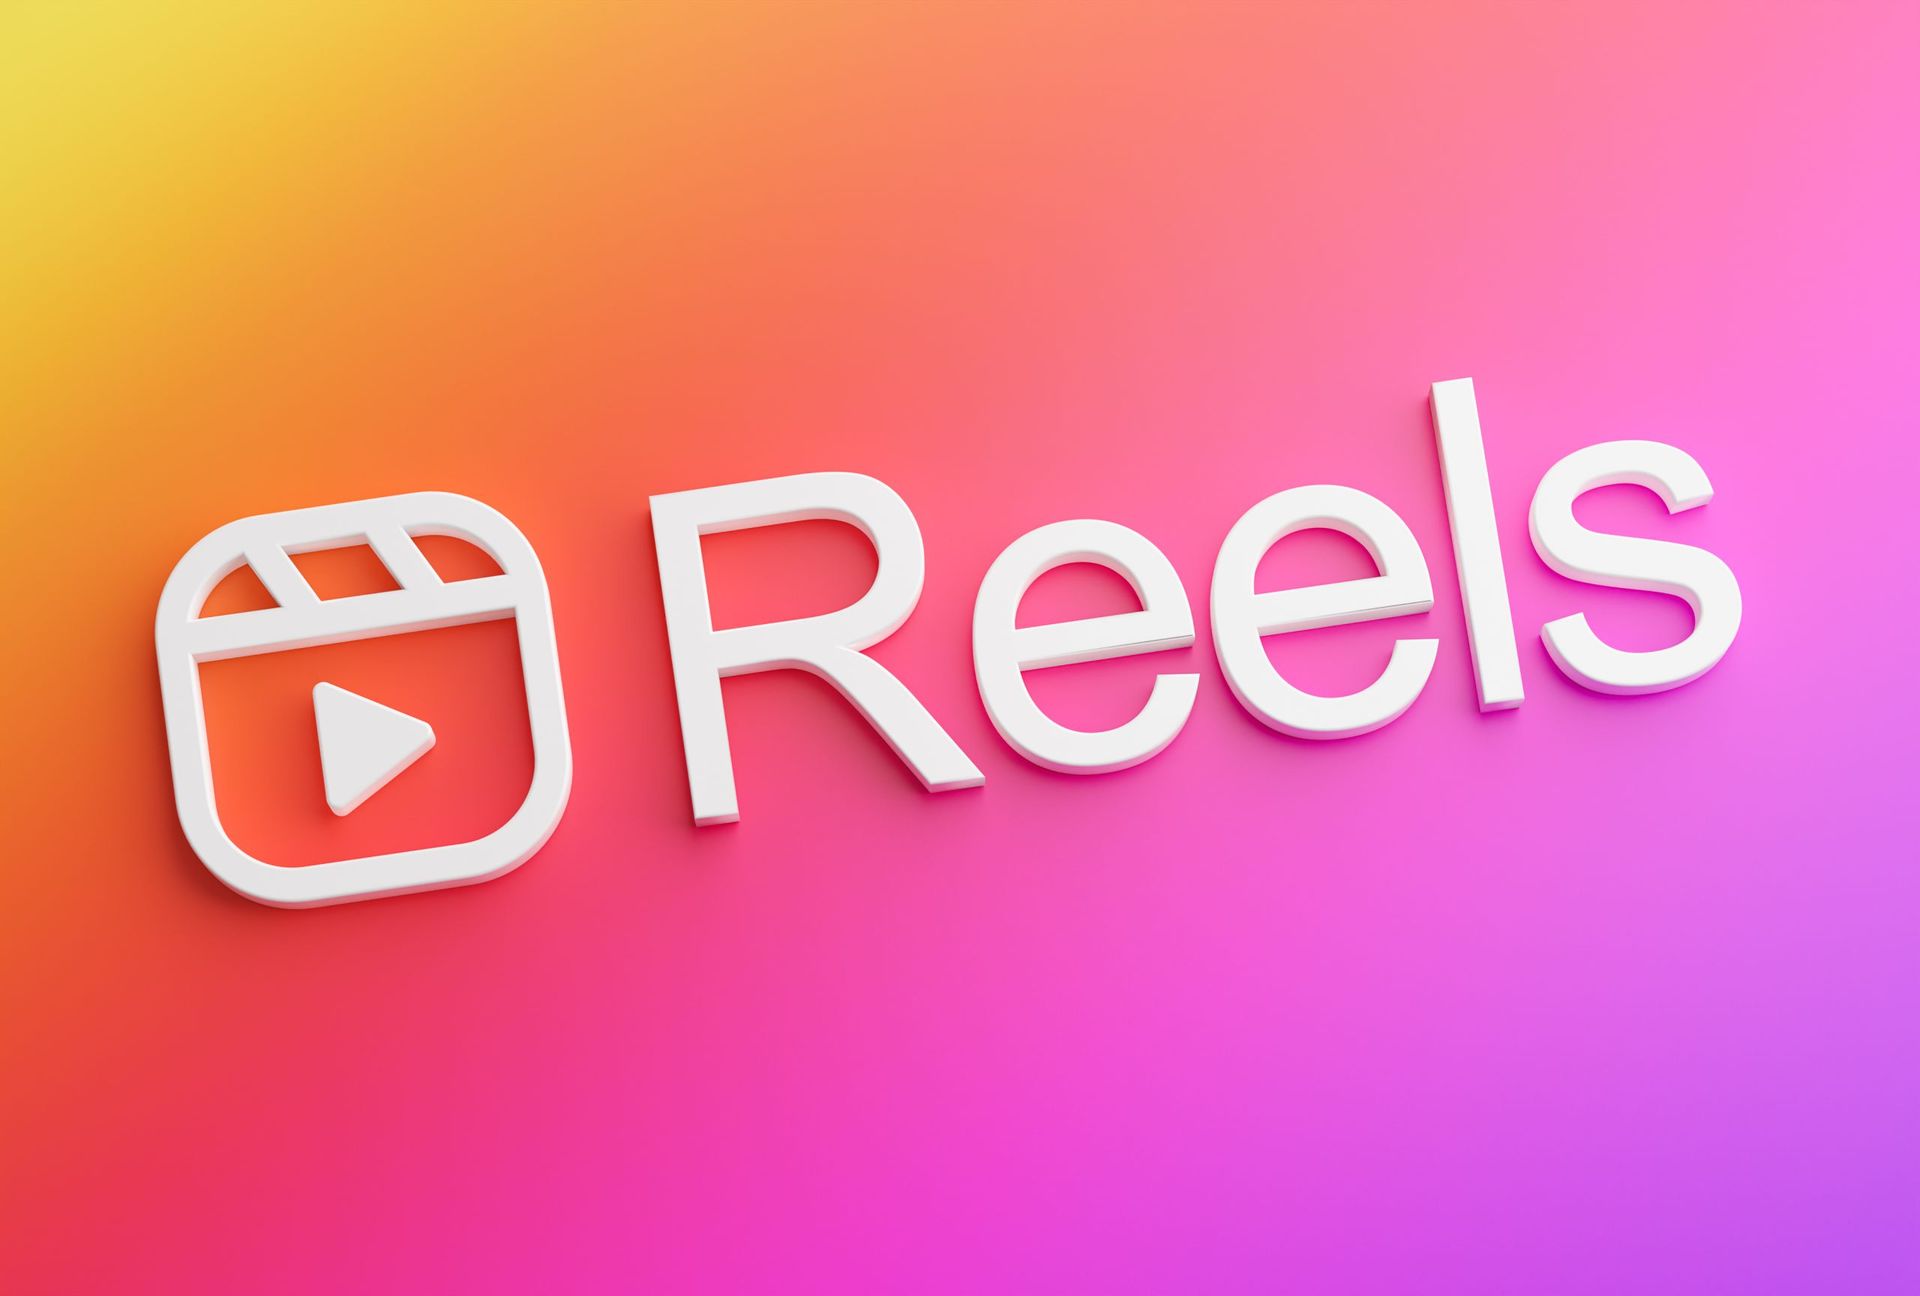 Today we are here to explain how to make money with Instagram Reels.